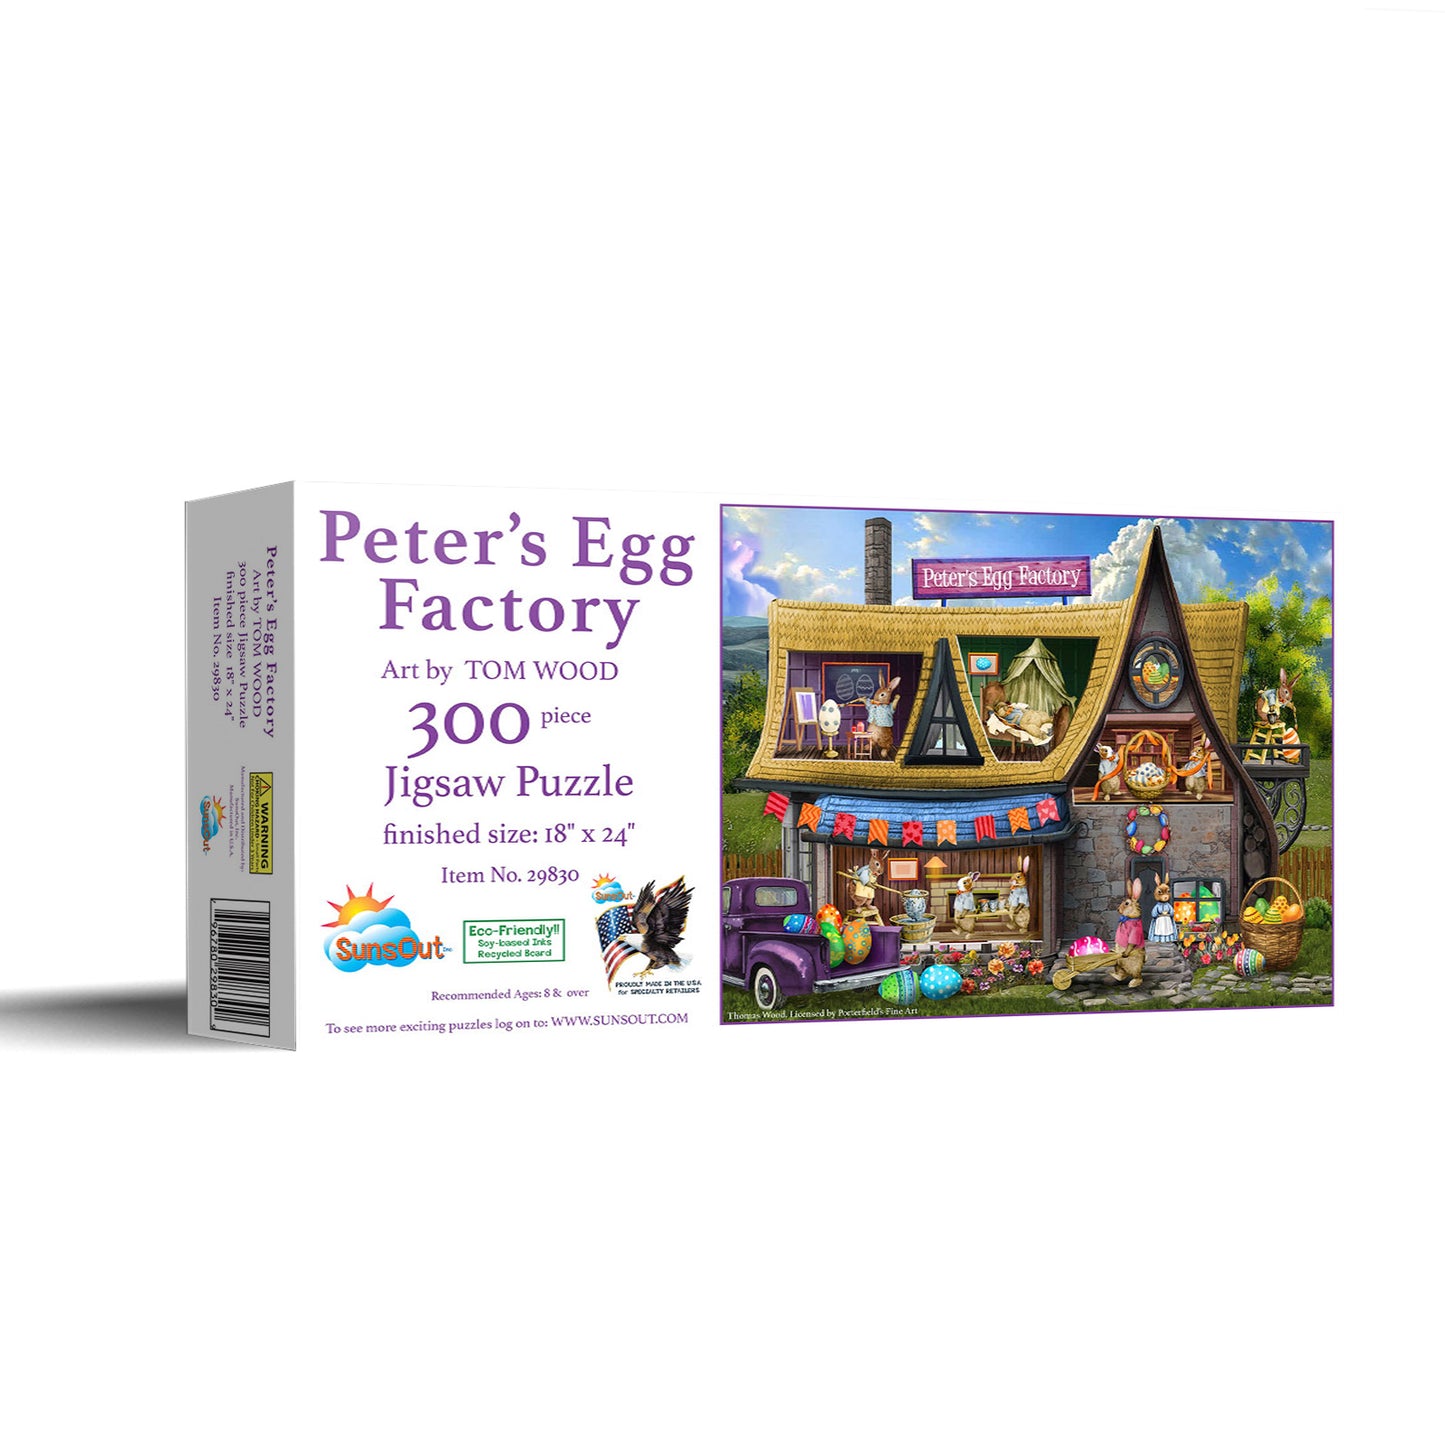 Peter's Egg Factory - 300 Piece Jigsaw Puzzle